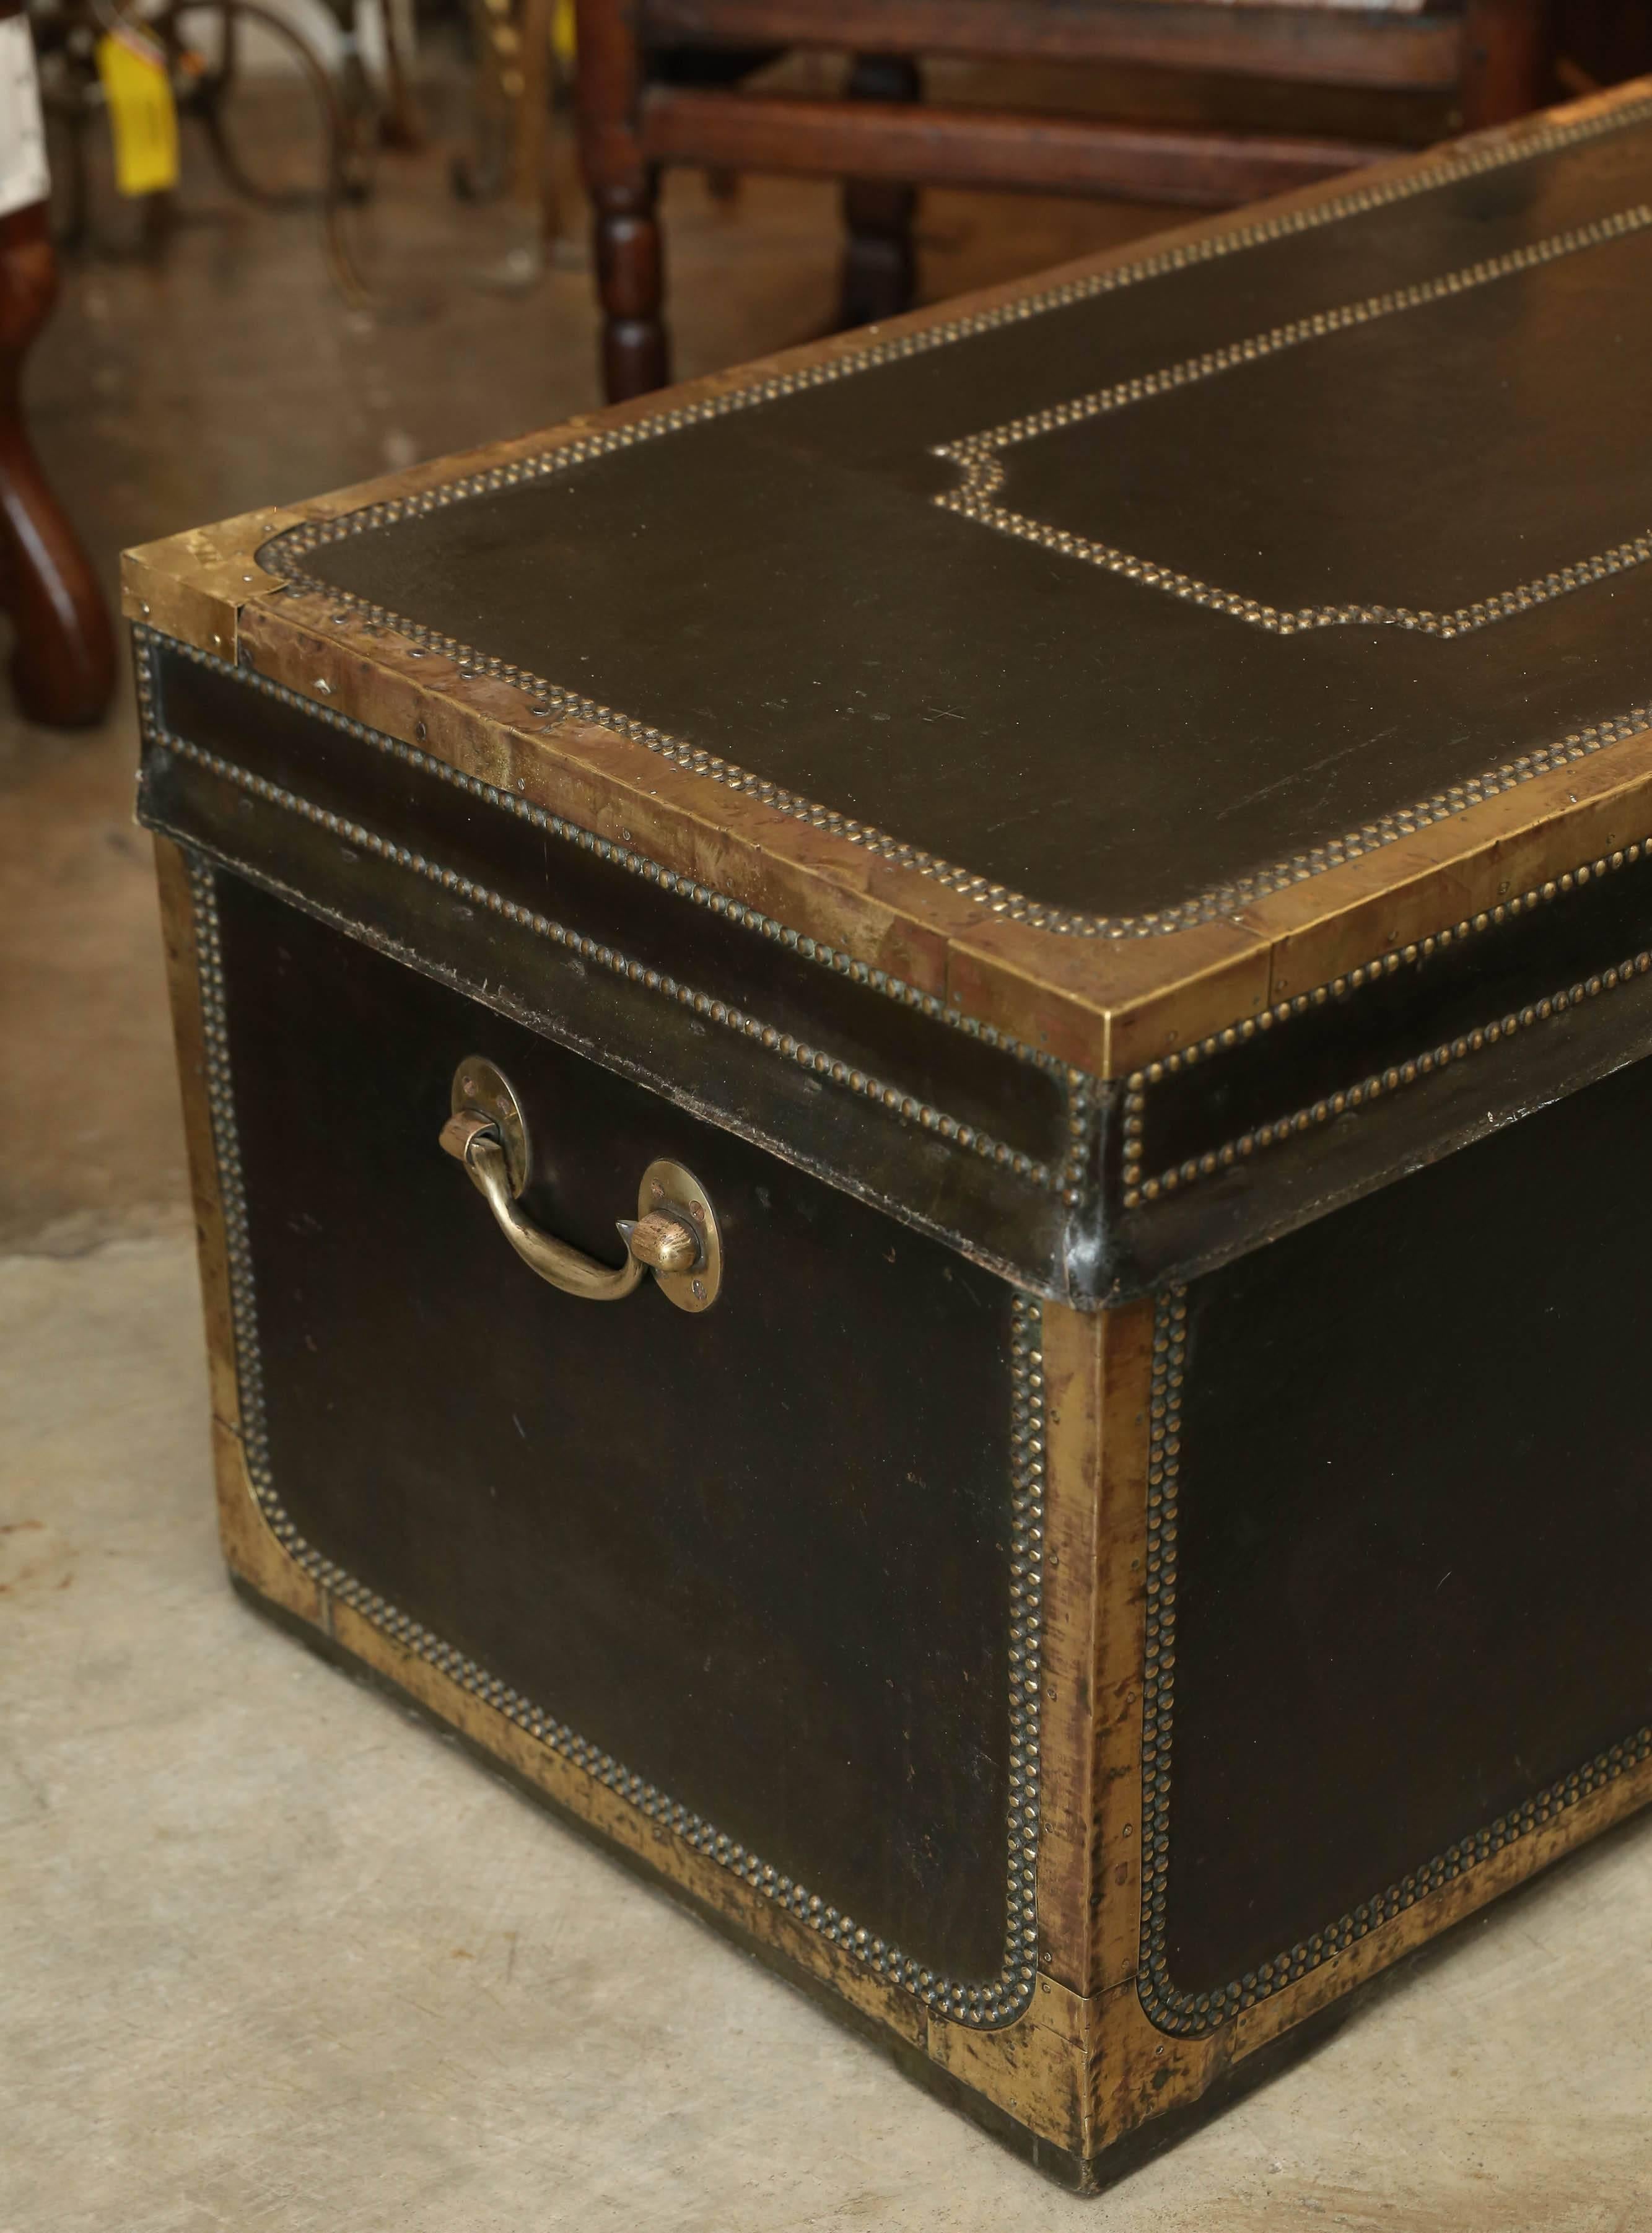 British Military Campaign leather camphor wood trunk covered with a double row of brass nails and brass detail.